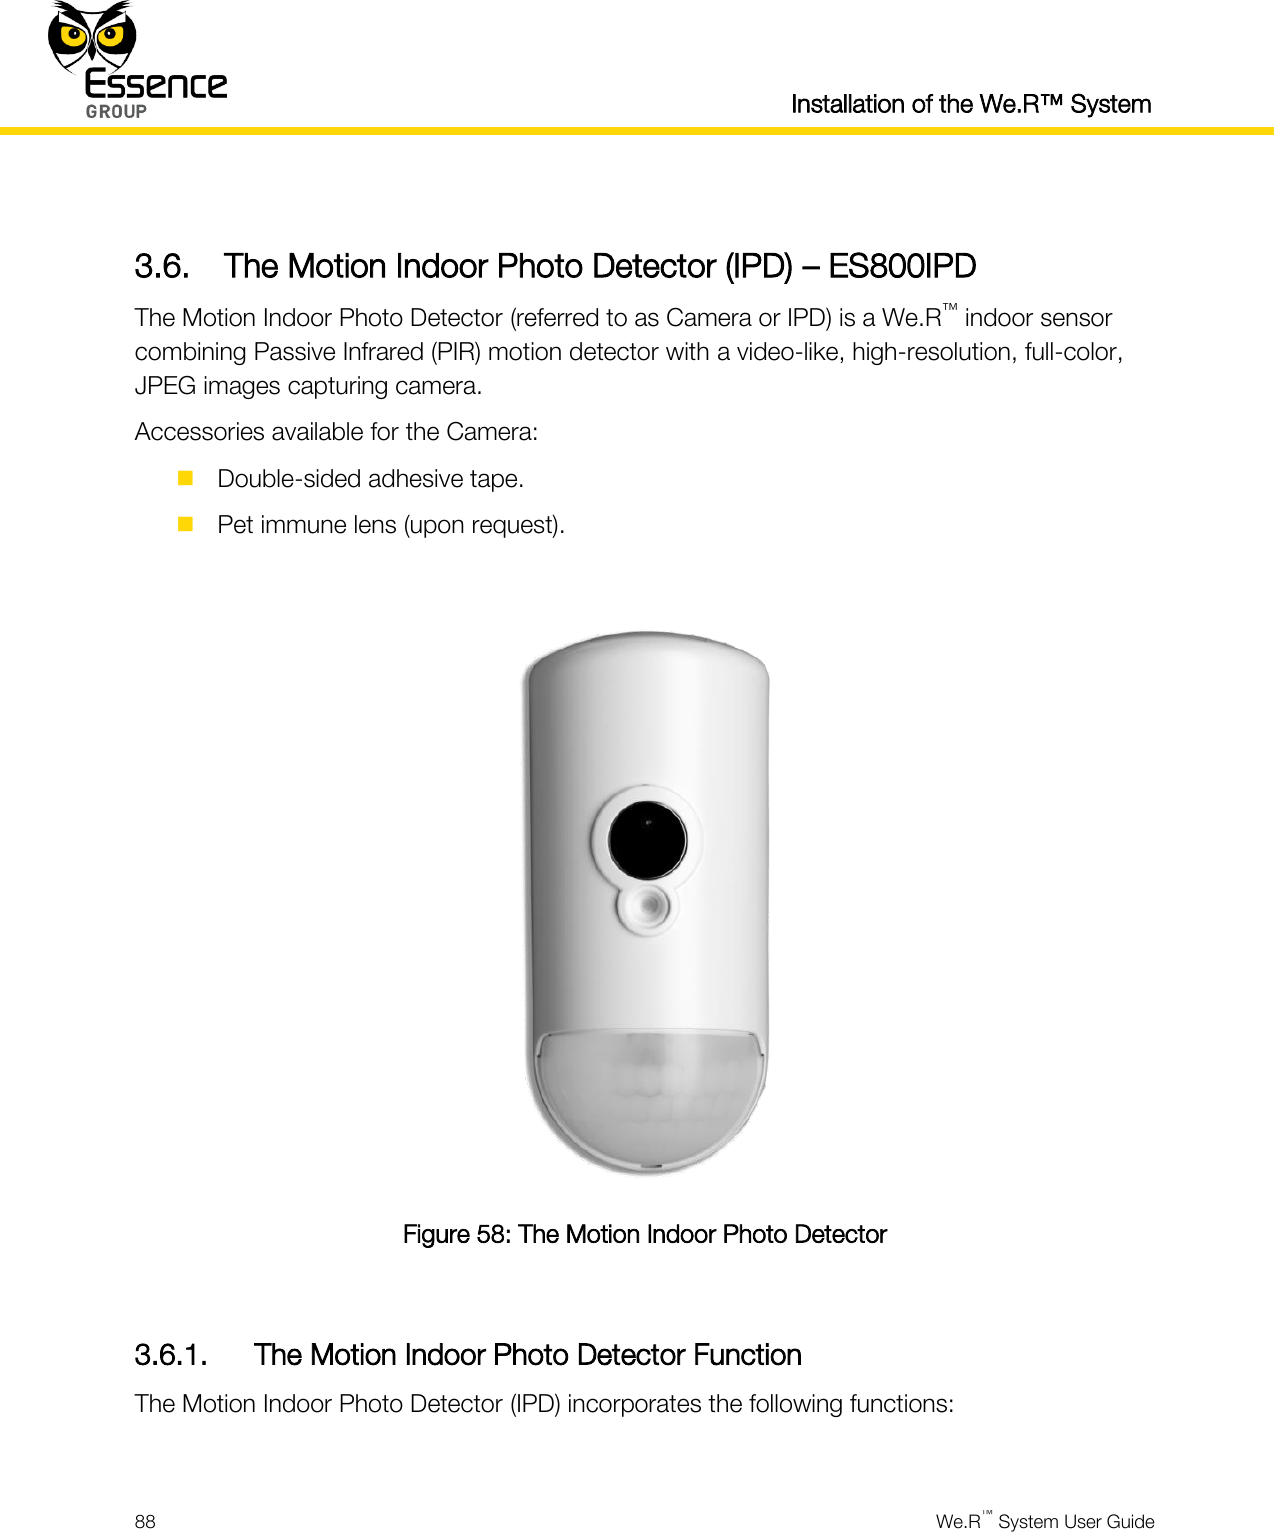  Installation of the We.R™ System  88  We.R™ System User Guide   3.6. The Motion Indoor Photo Detector (IPD) – ES800IPD The Motion Indoor Photo Detector (referred to as Camera or IPD) is a We.R™ indoor sensor combining Passive Infrared (PIR) motion detector with a video-like, high-resolution, full-color, JPEG images capturing camera. Accessories available for the Camera:  Double-sided adhesive tape.  Pet immune lens (upon request).   Figure 58: The Motion Indoor Photo Detector  3.6.1. The Motion Indoor Photo Detector Function The Motion Indoor Photo Detector (IPD) incorporates the following functions:  